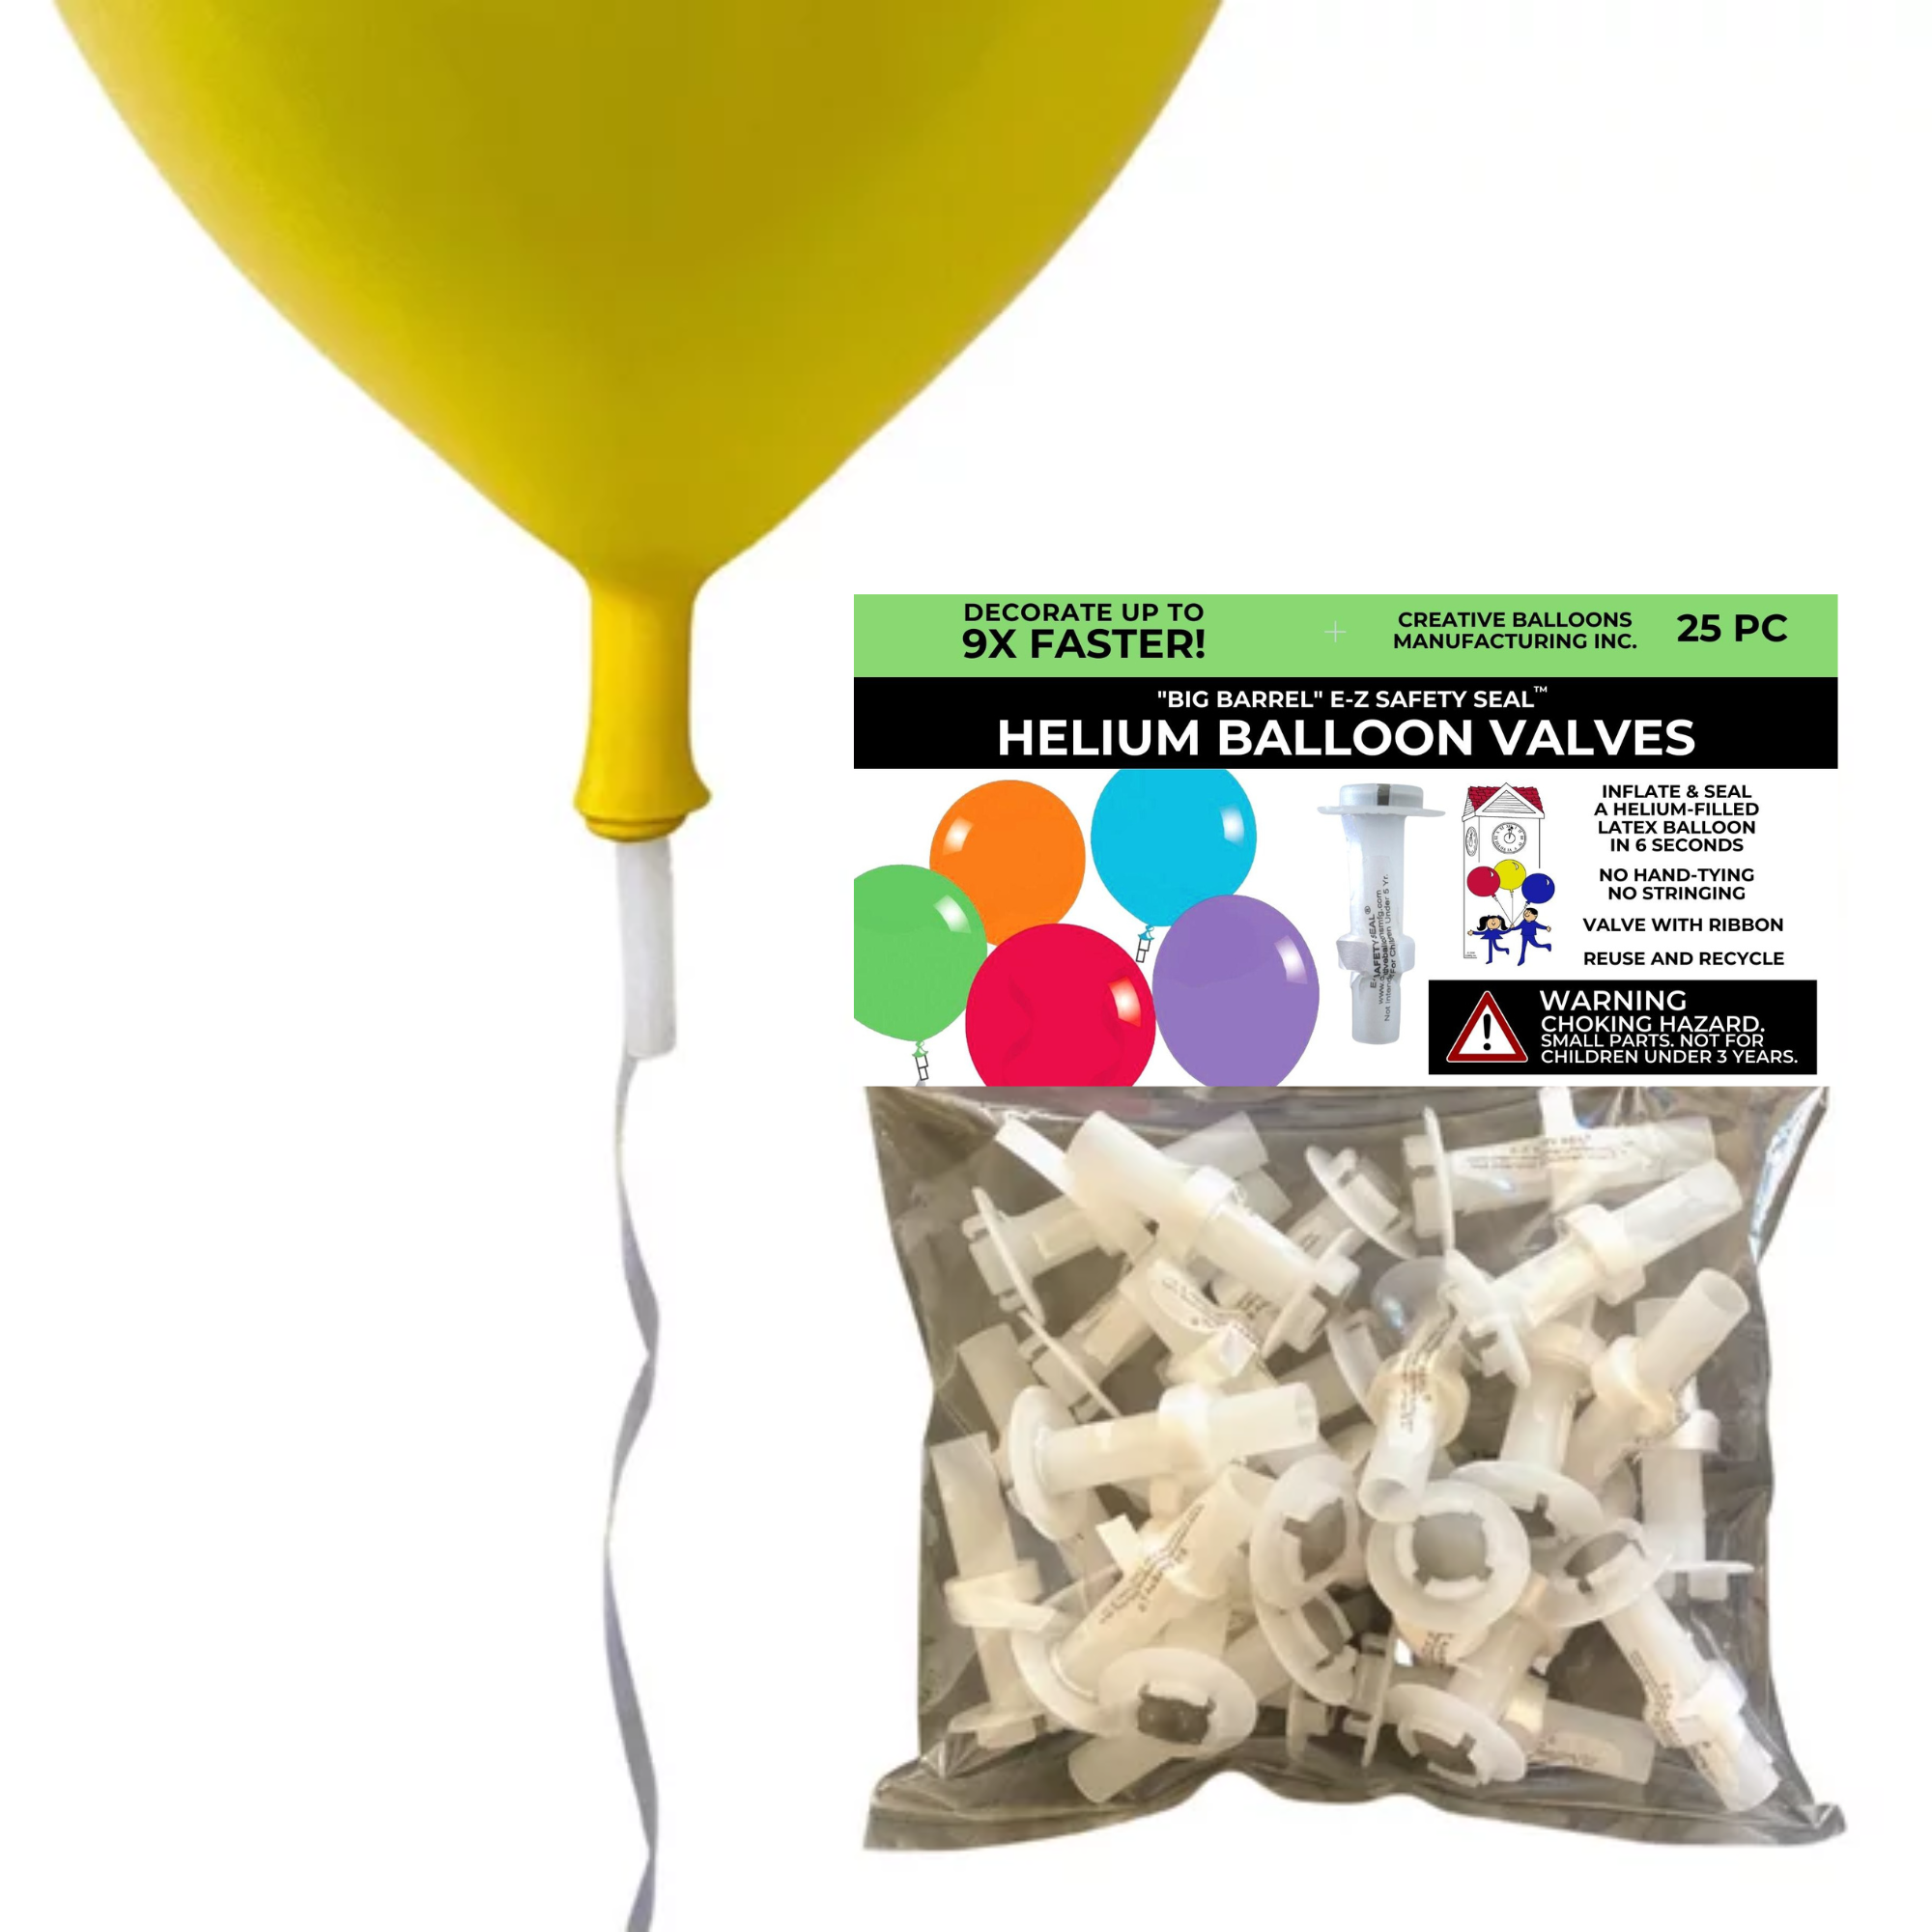 Big Barrel E-Z Safety Seal Helium Balloon Valves - Quickly Seals Latex Balloons - 25 Ct, Clear